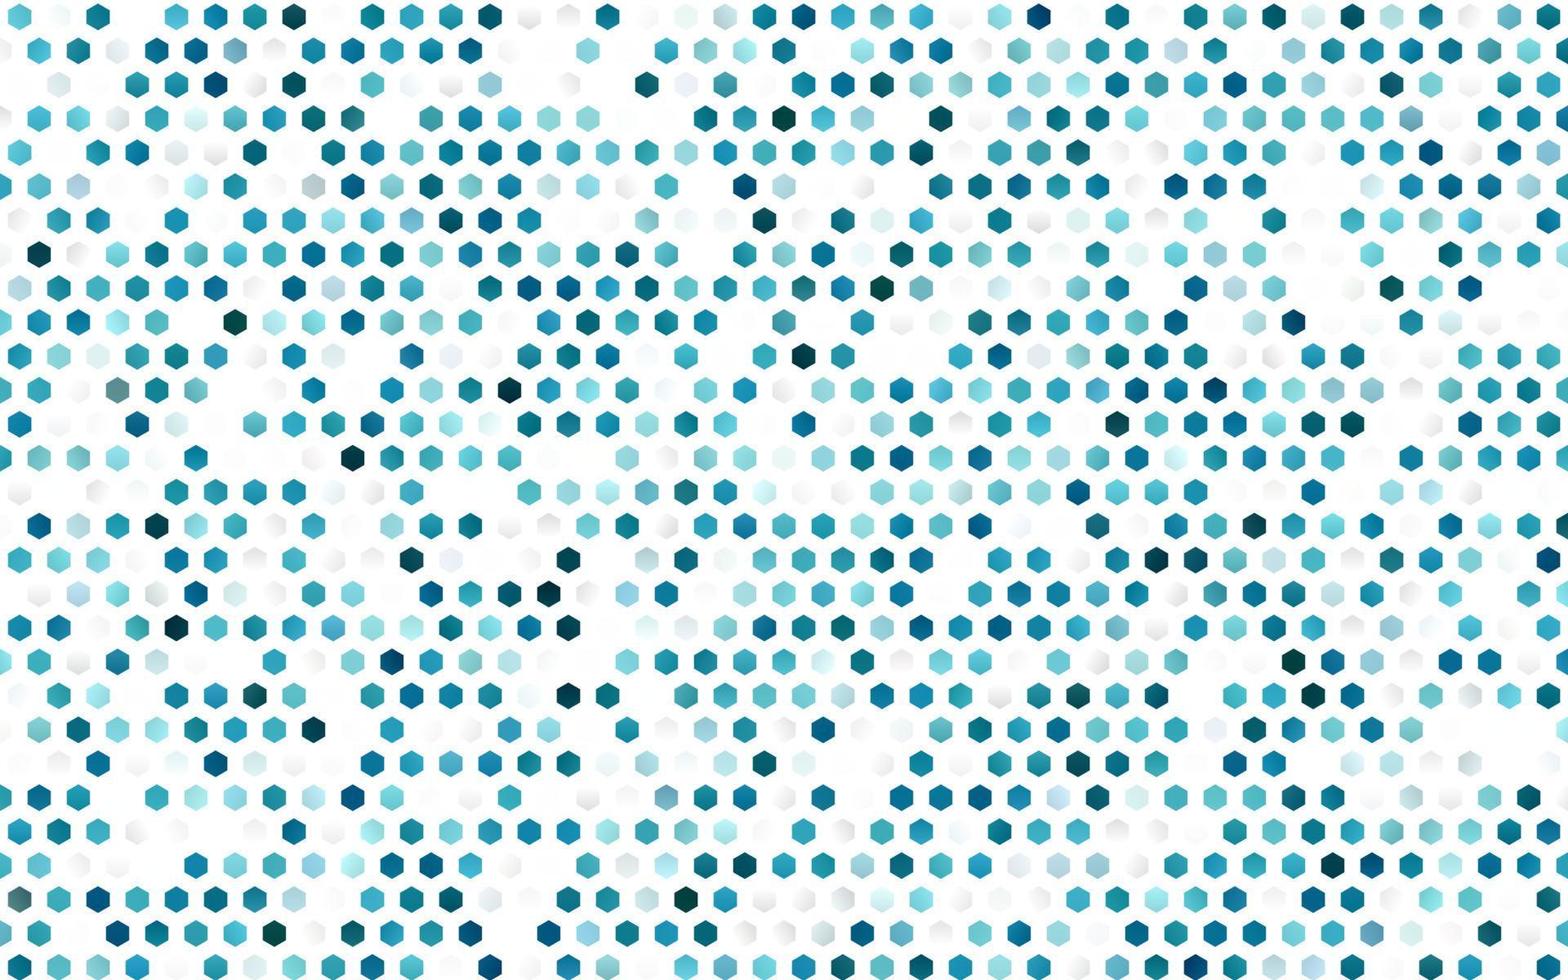 Dark BLUE vector cover with set of hexagons.